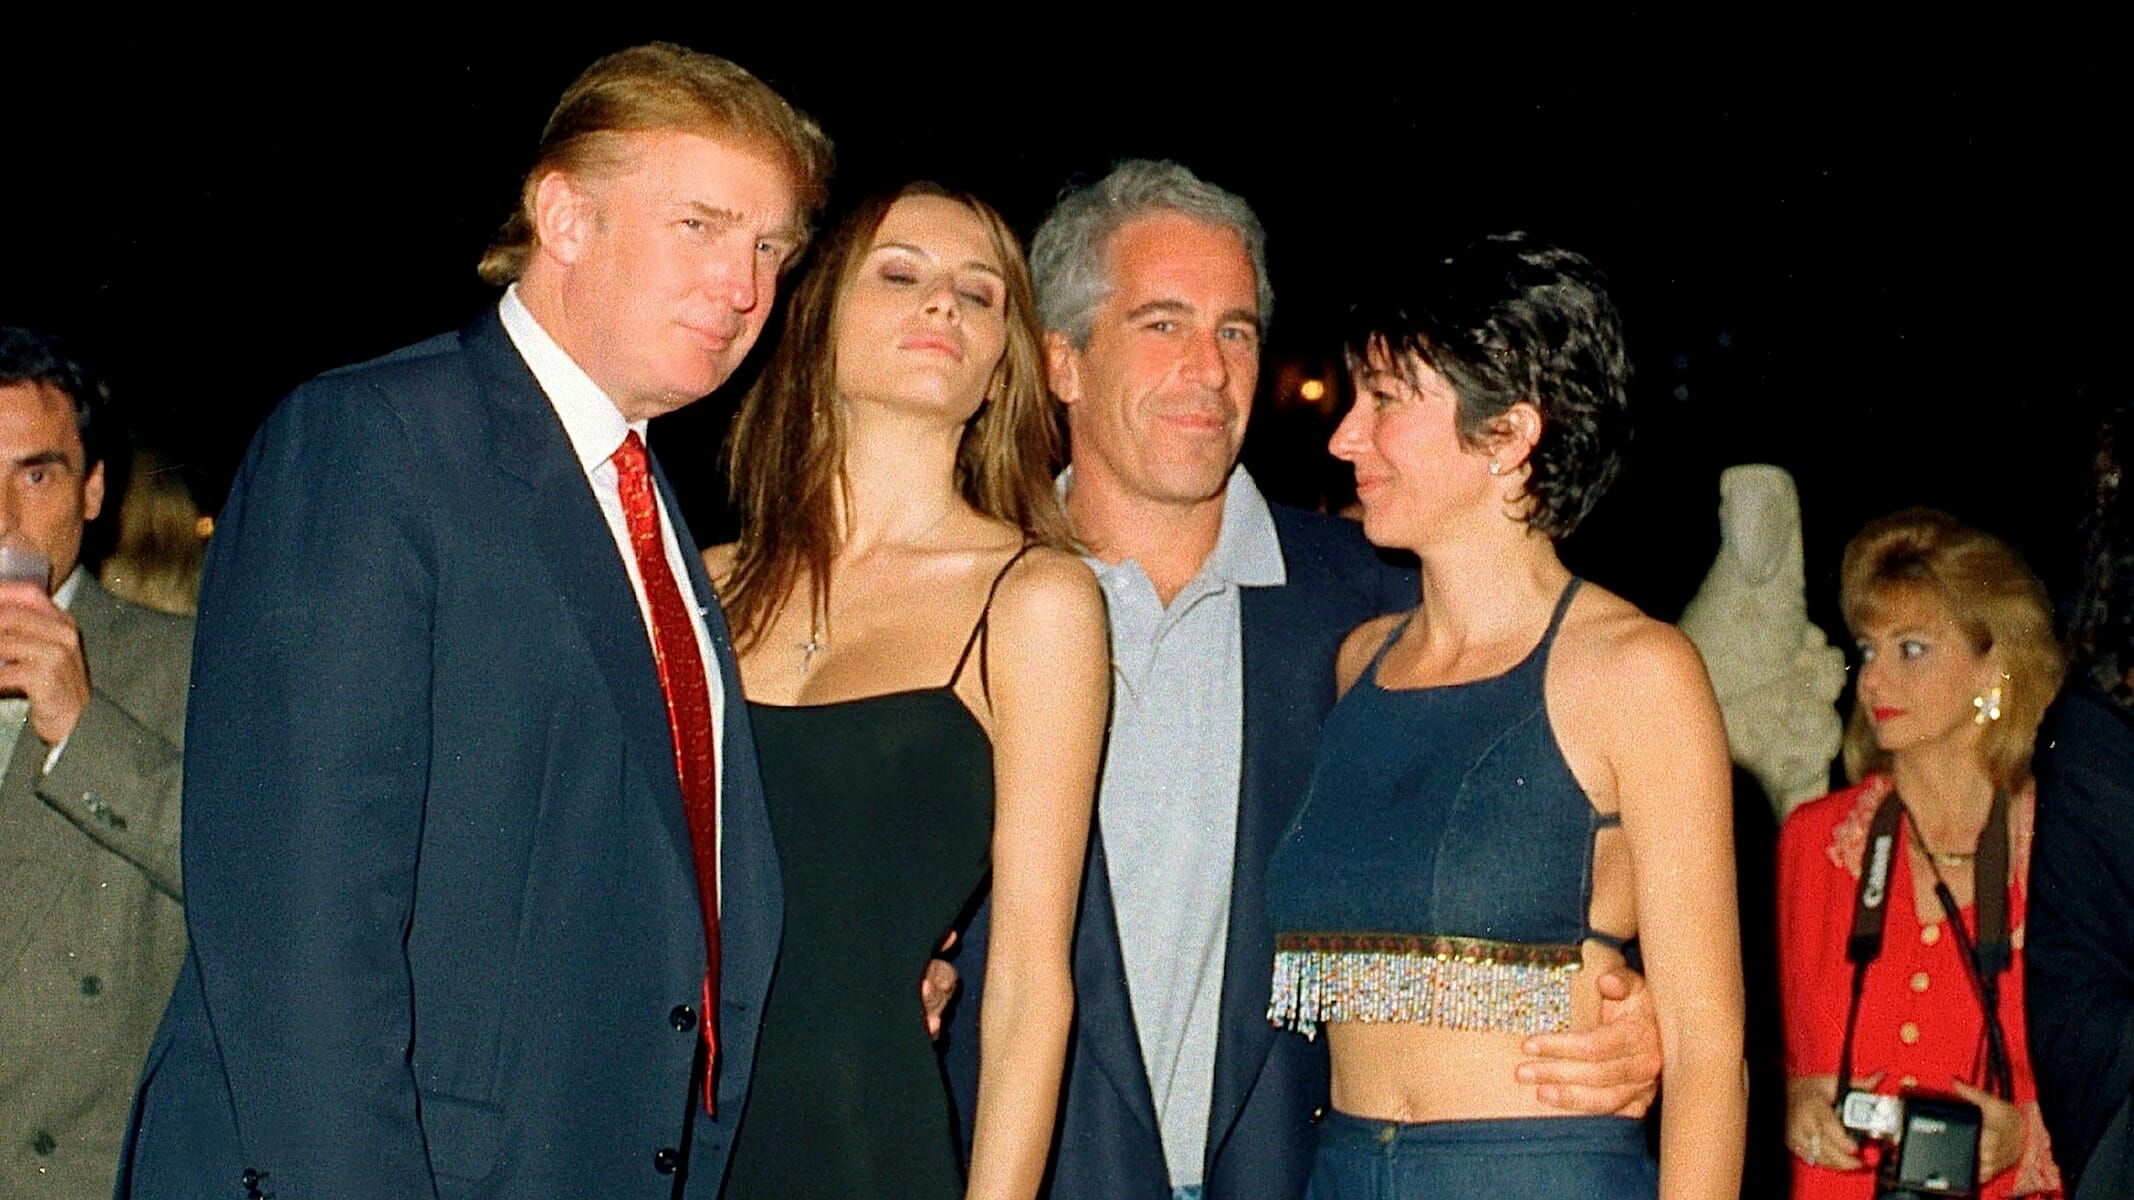 The Media Ignored Jeff Epstein Until They Couldn’t